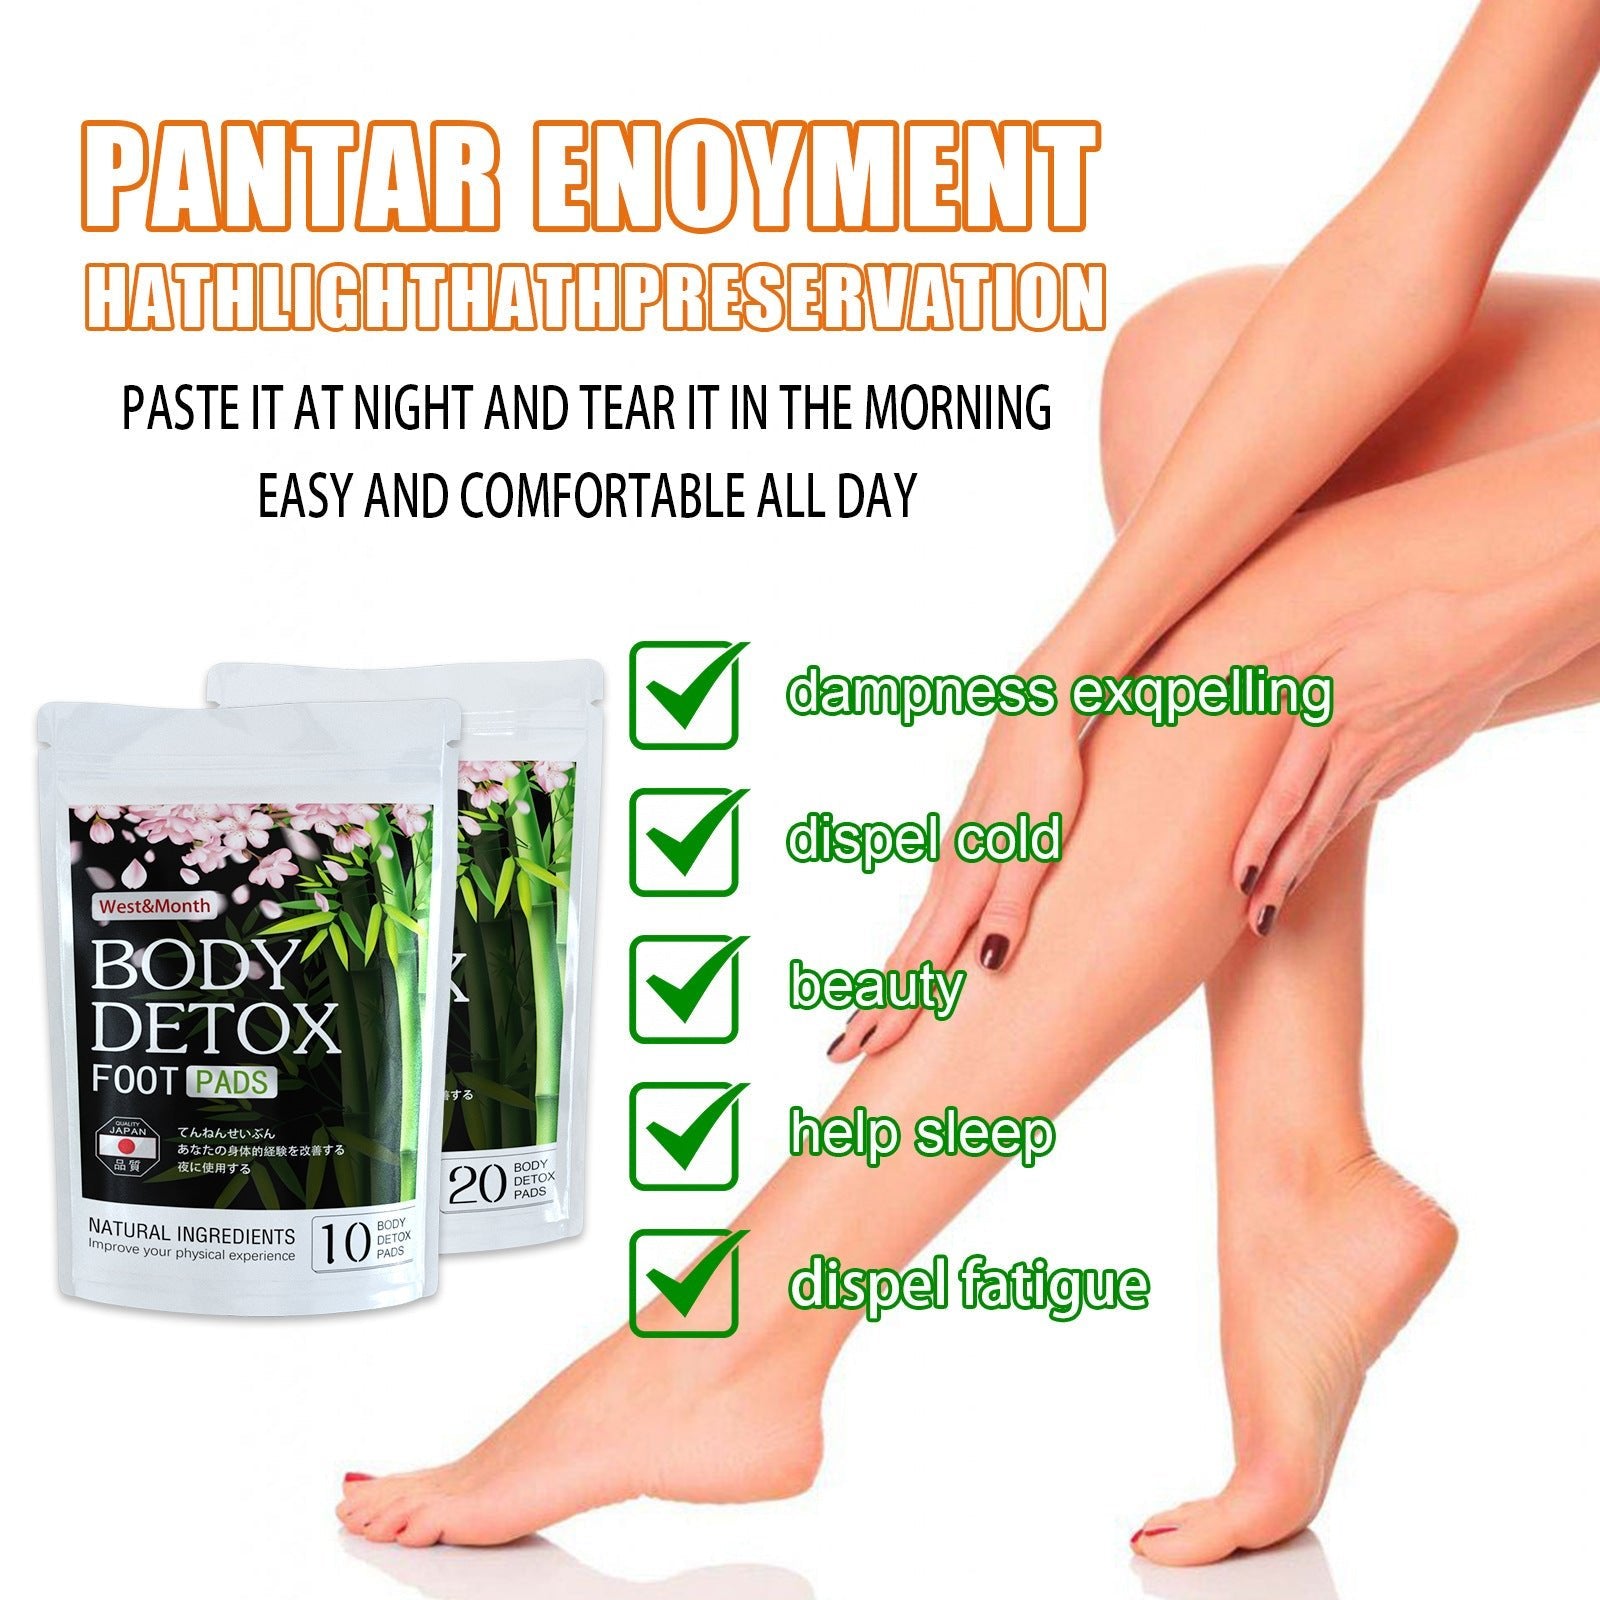 Natural Herbal Foot Patch For Beauty And Sleep - thatnatureworld